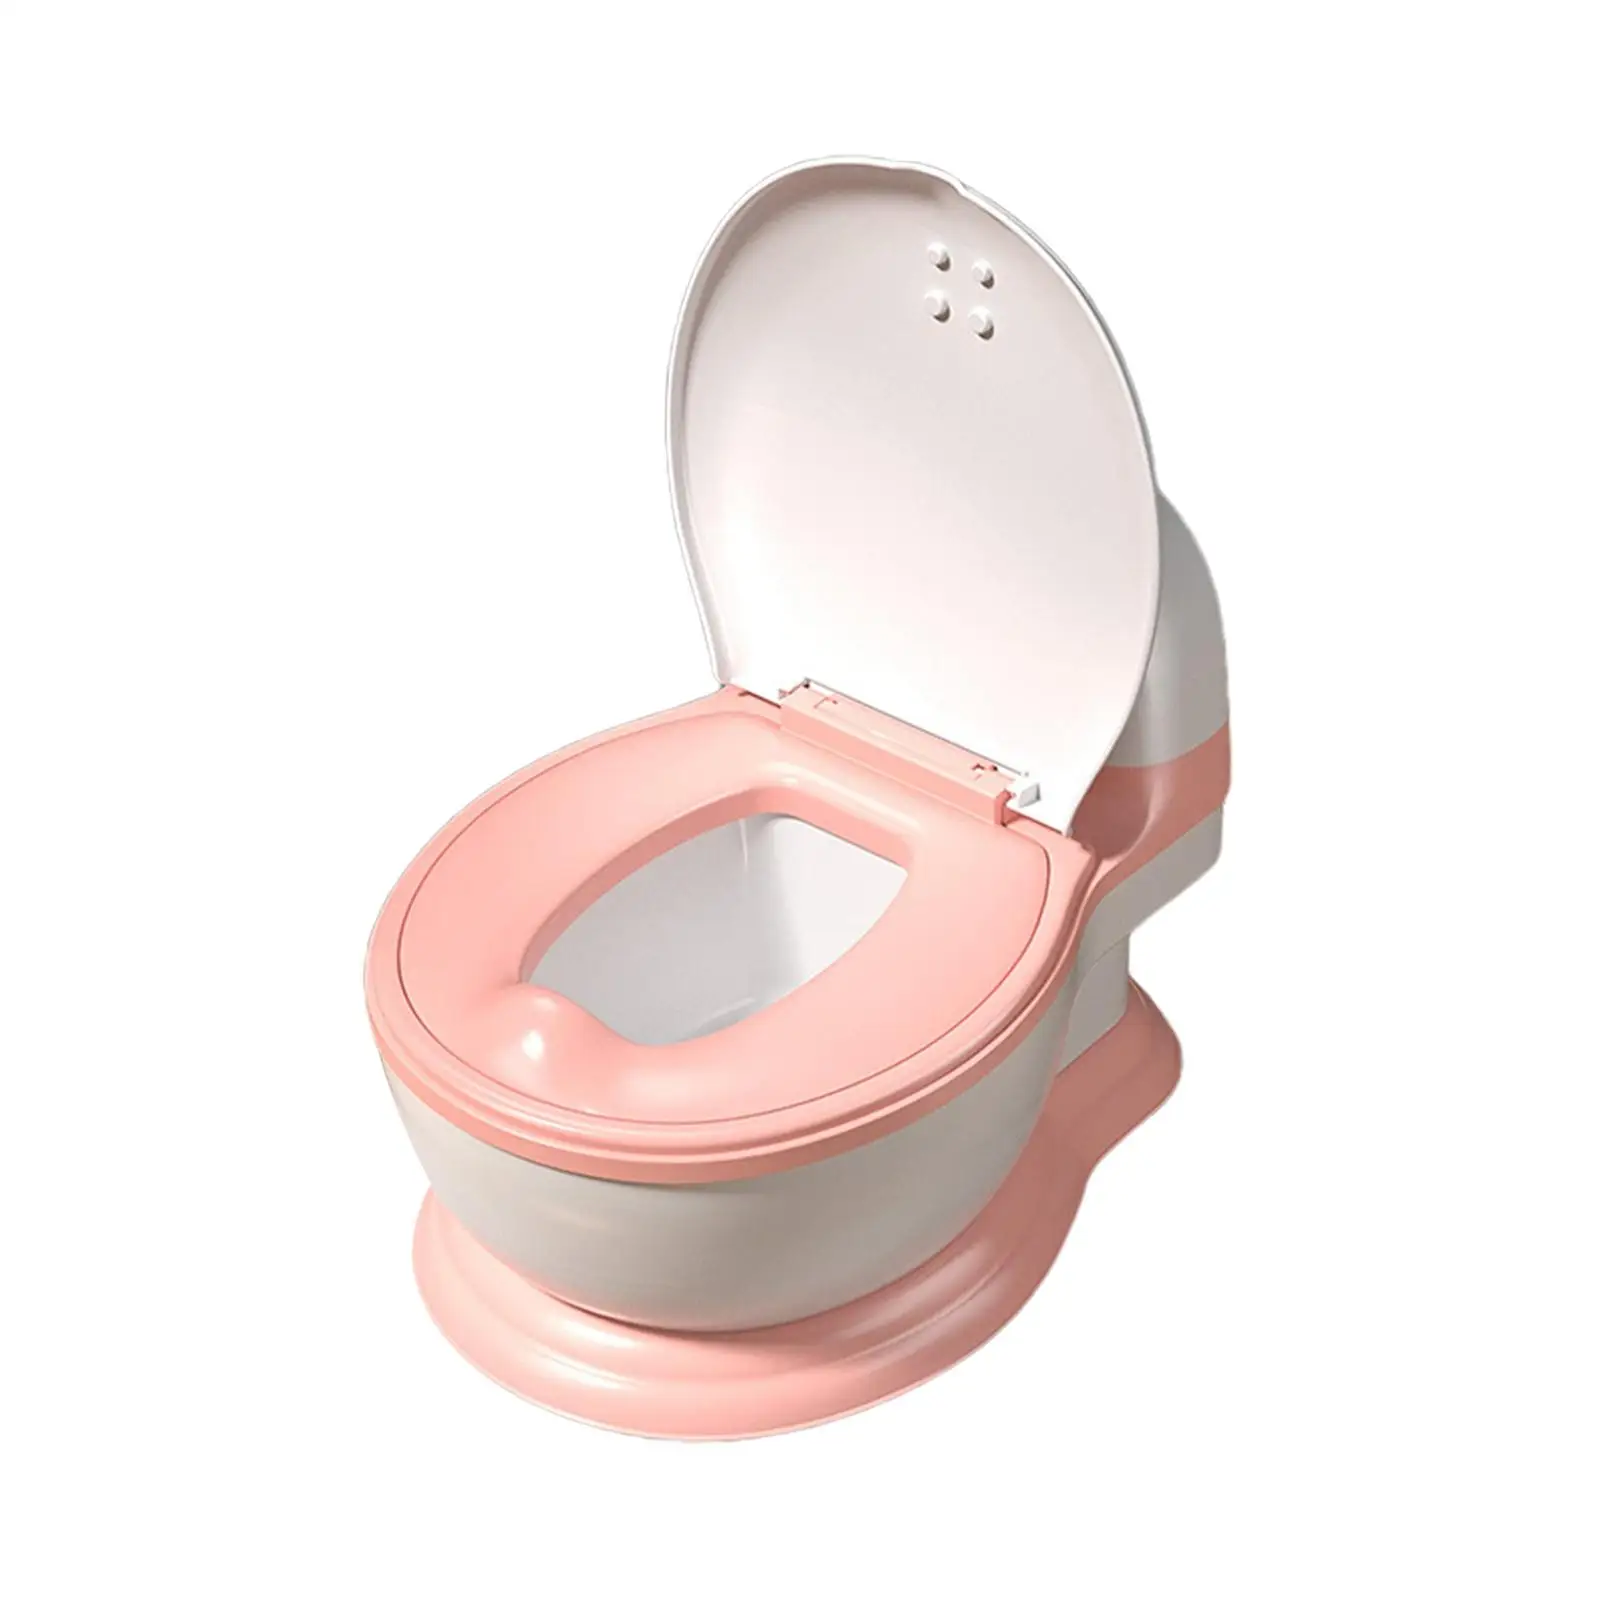 Real Feel Potty Removable Portable with Pad Anti Slip Travel Toddlers Potty Chair for Bedroom Nursery Indoor Hotel Kindergarten